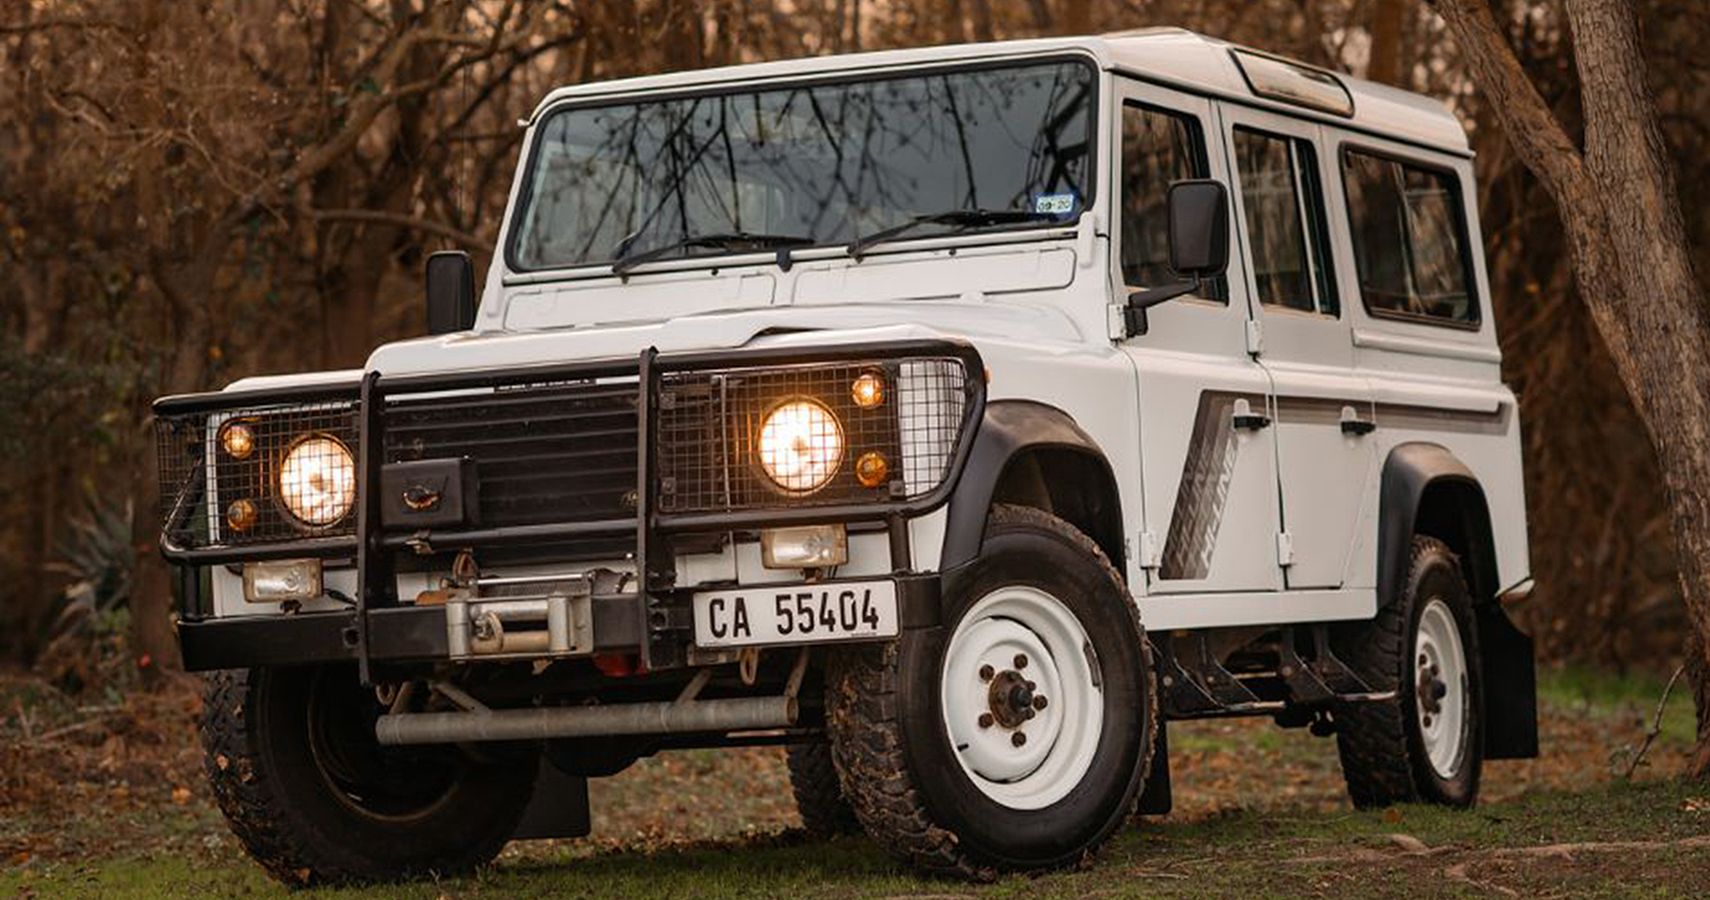 1993-97 Land Rover Defender Is Wrangler’s Able Competitor